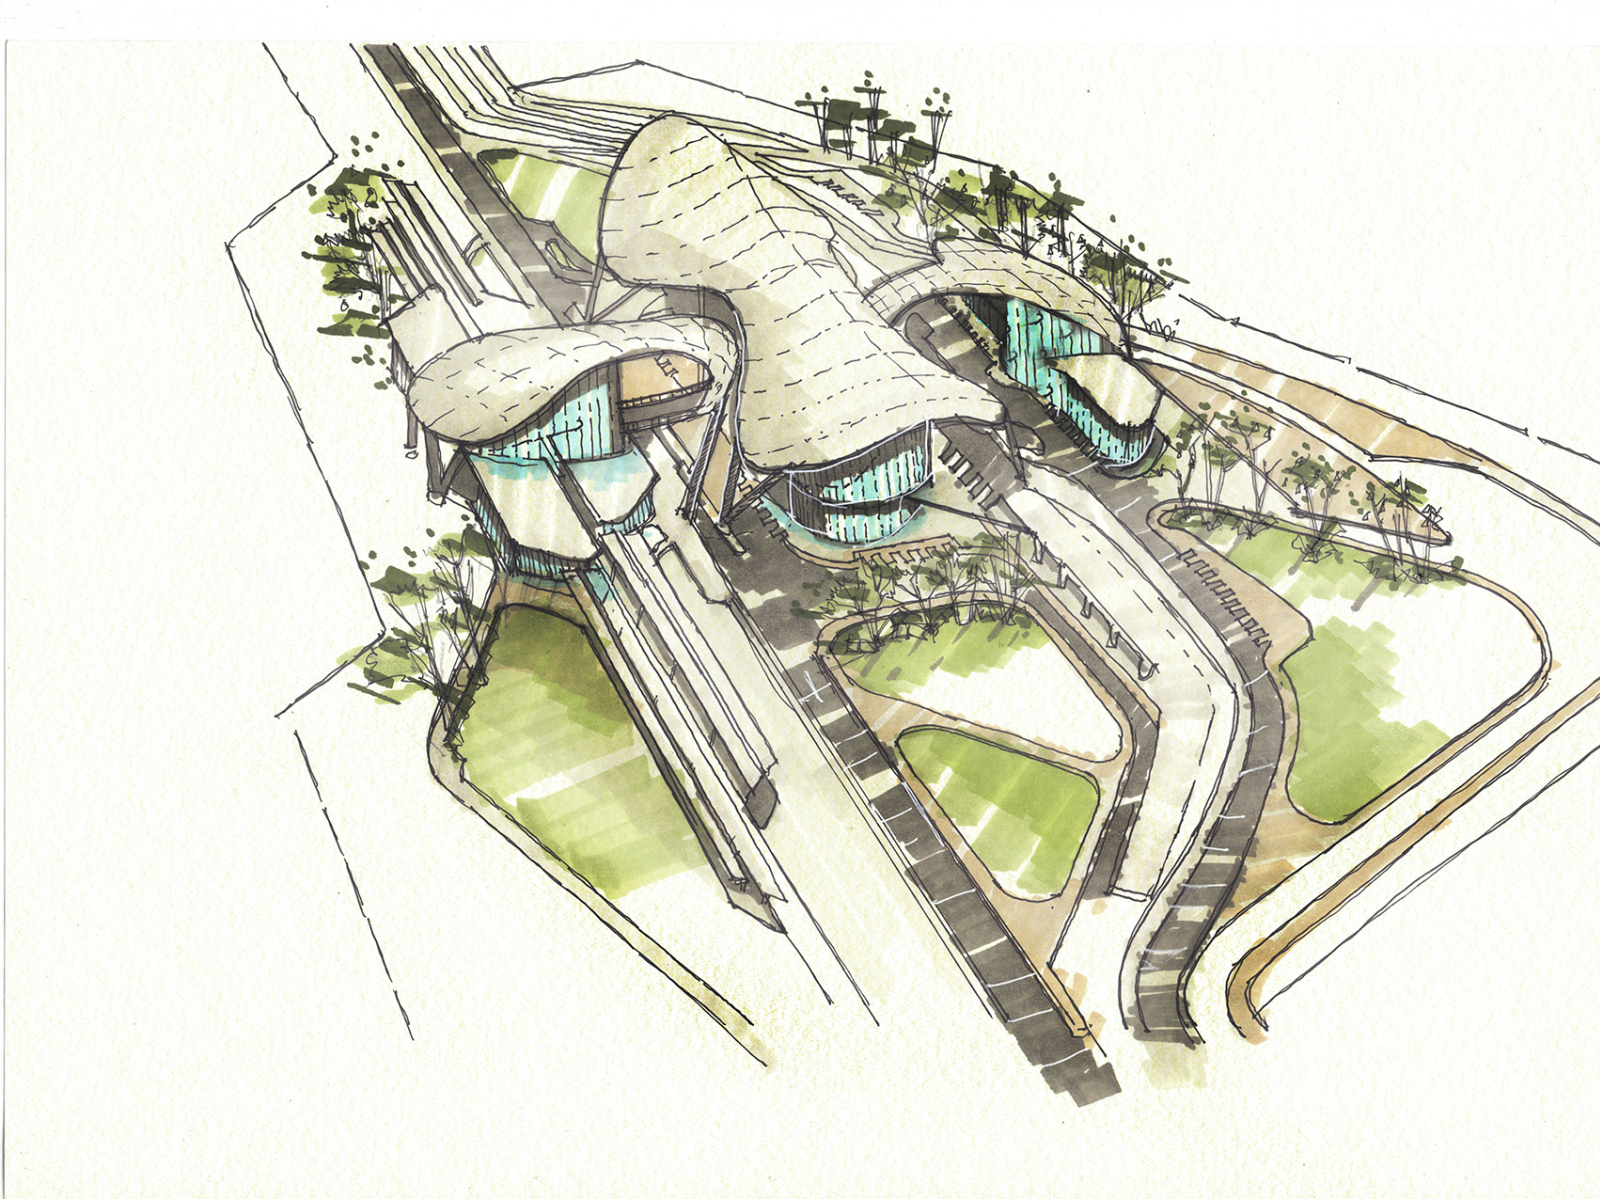 Conceptual Sketch Architectural By Kamrul Hasan On Dribbble